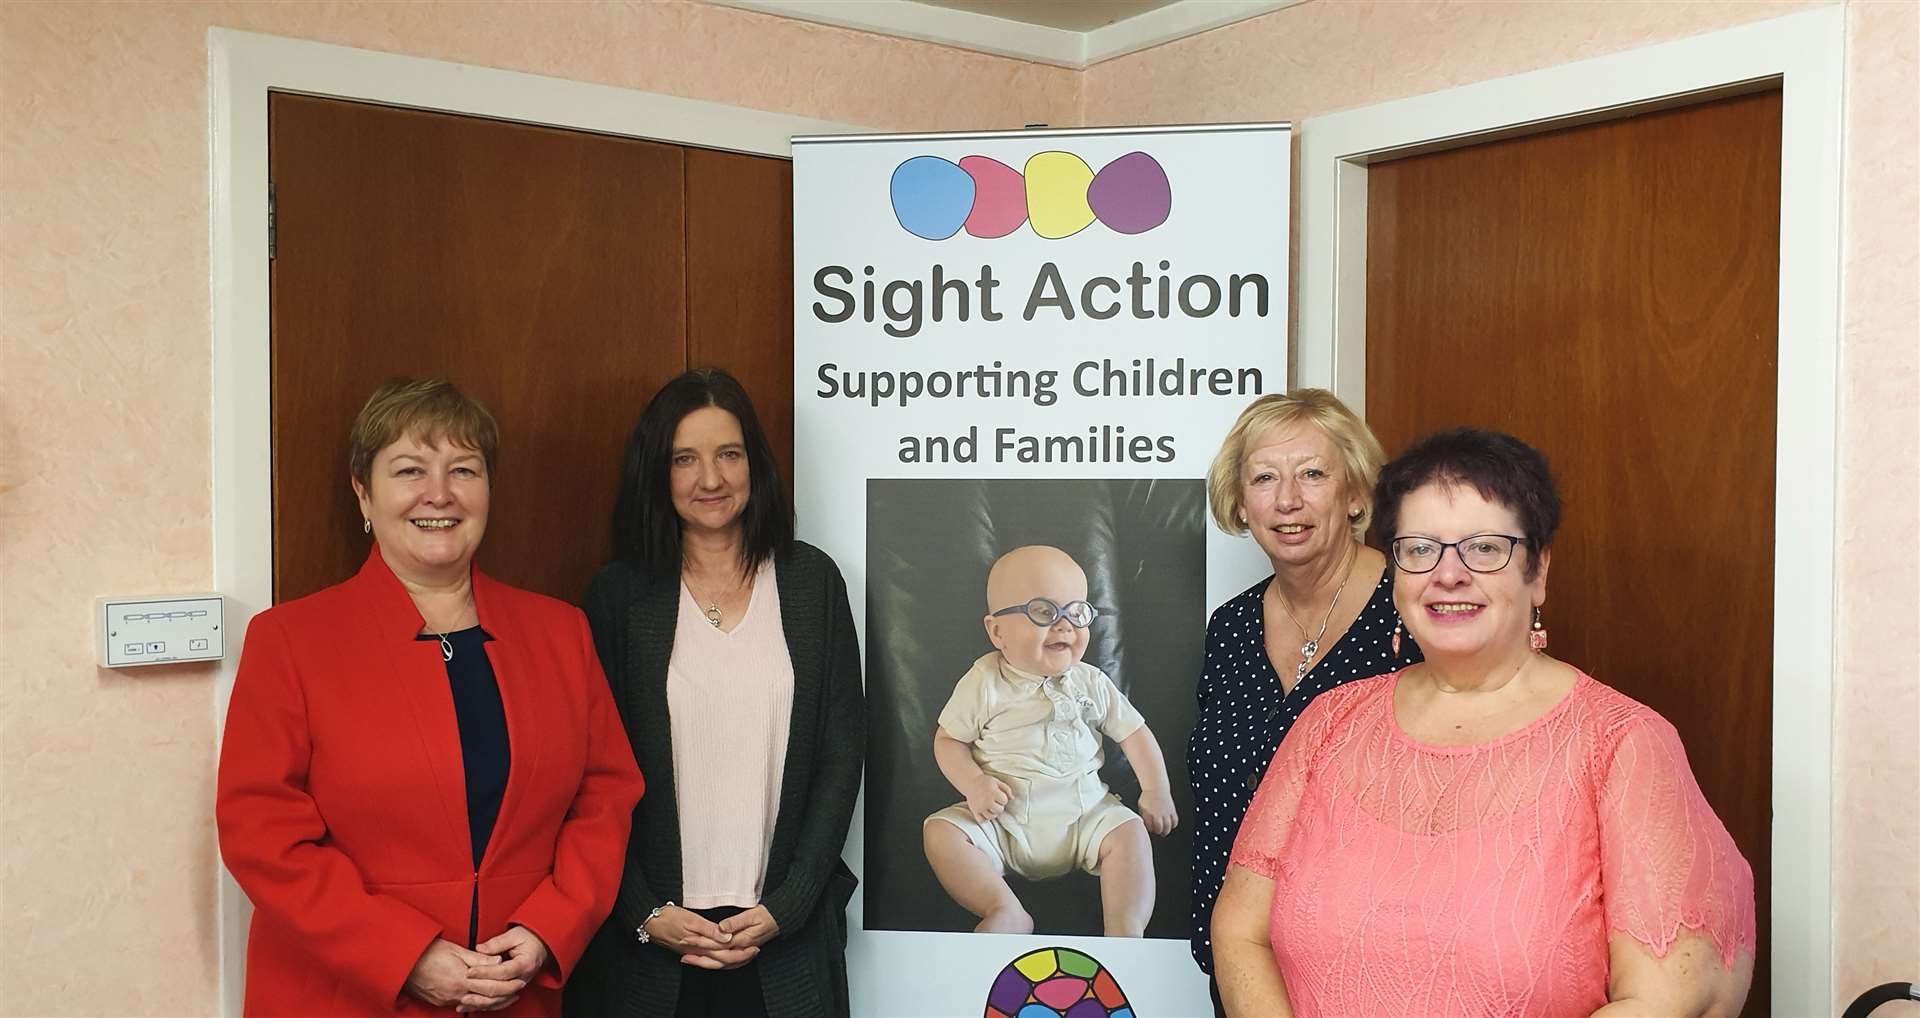 Rhoda Grant (left) with some of the Sight Action team.